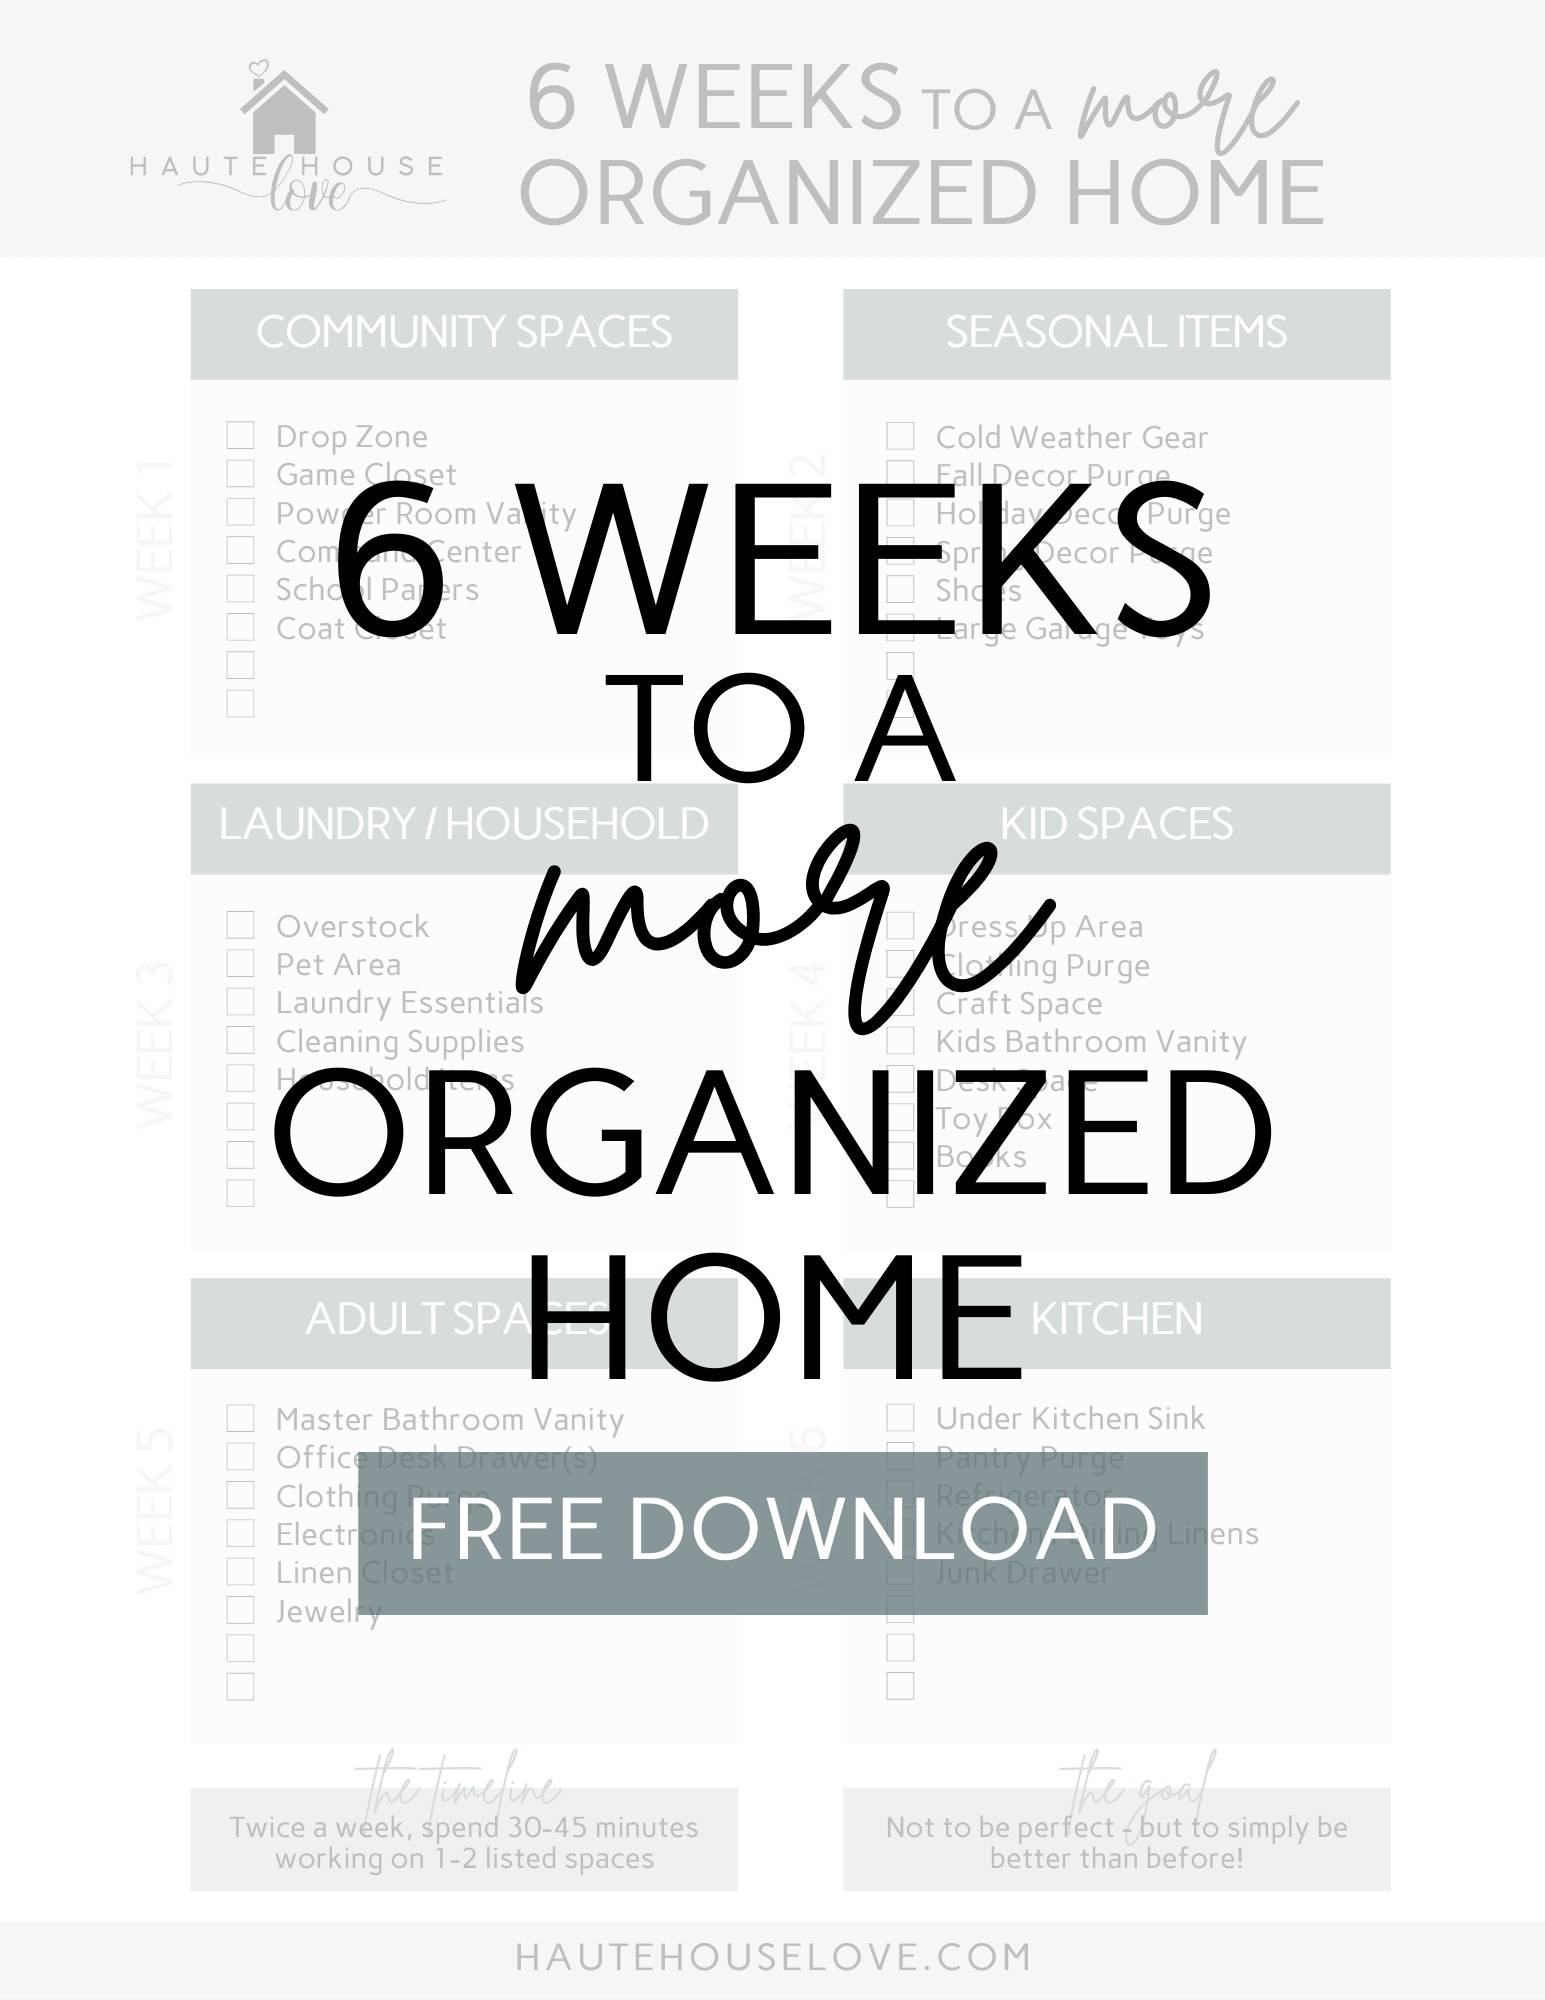 Home Organizing FREE downloadable checklist